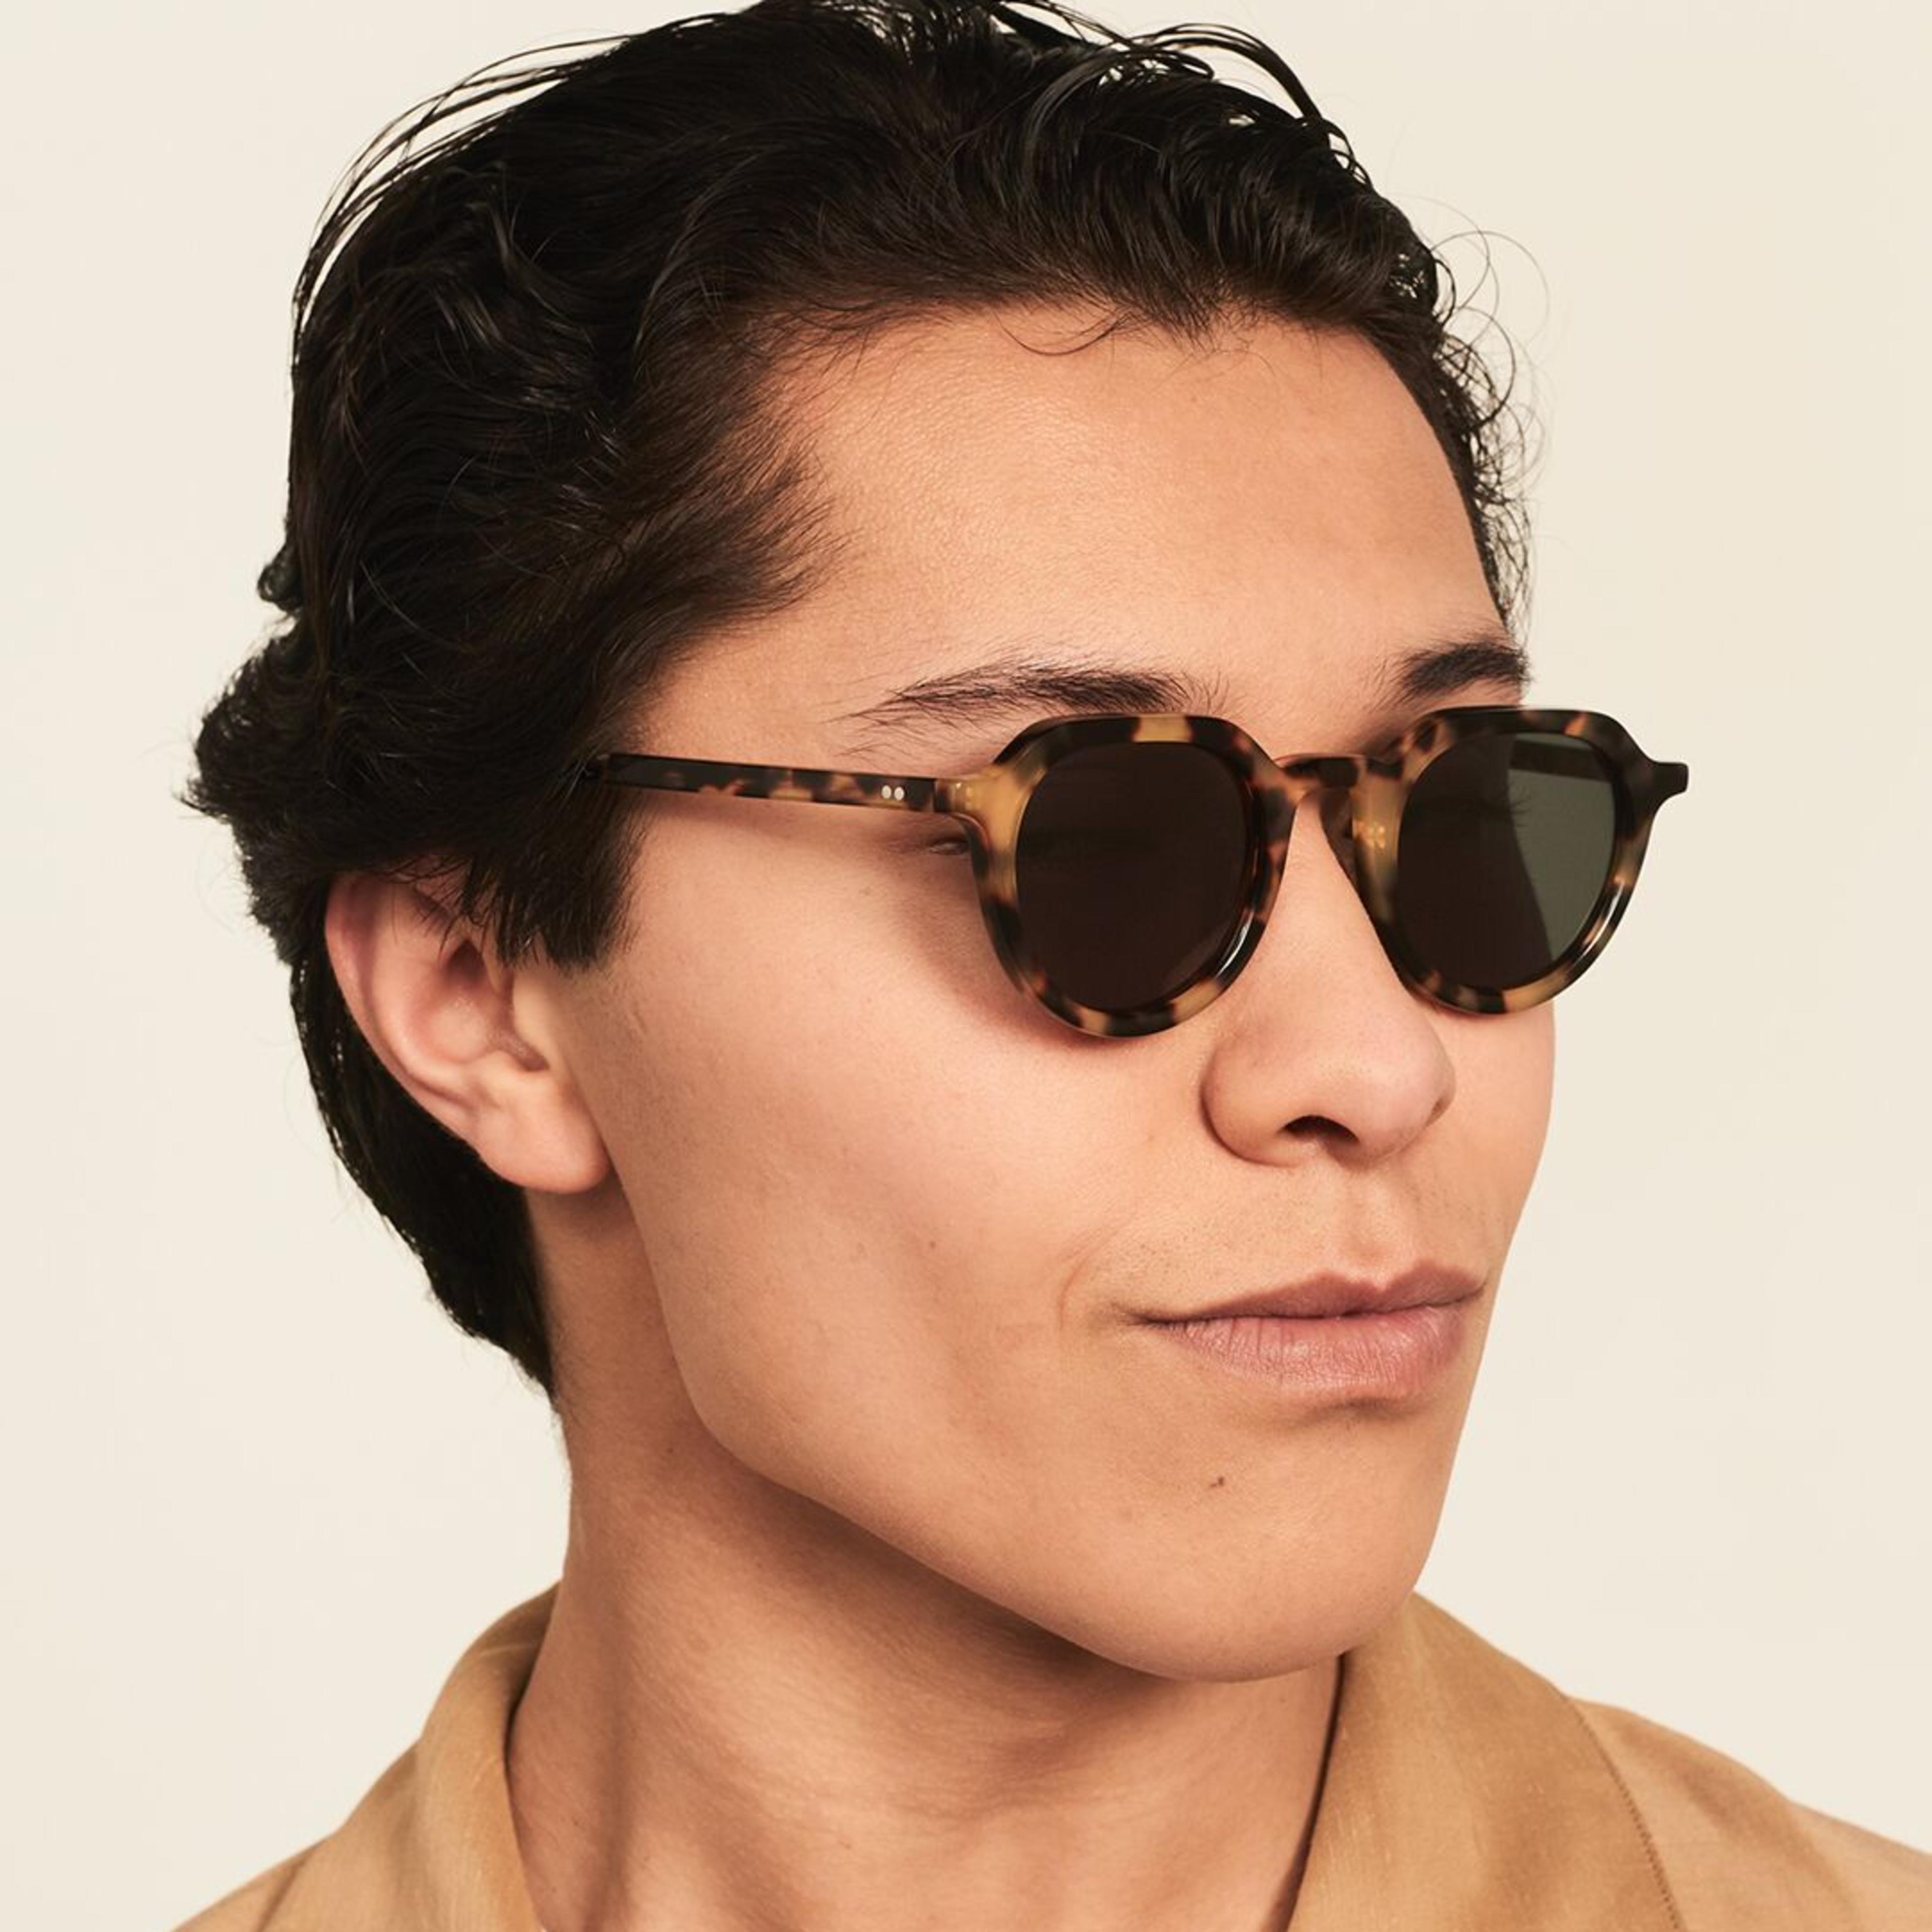 Ace & Tate Sunglasses | Round Acetate in Brown, Yellow